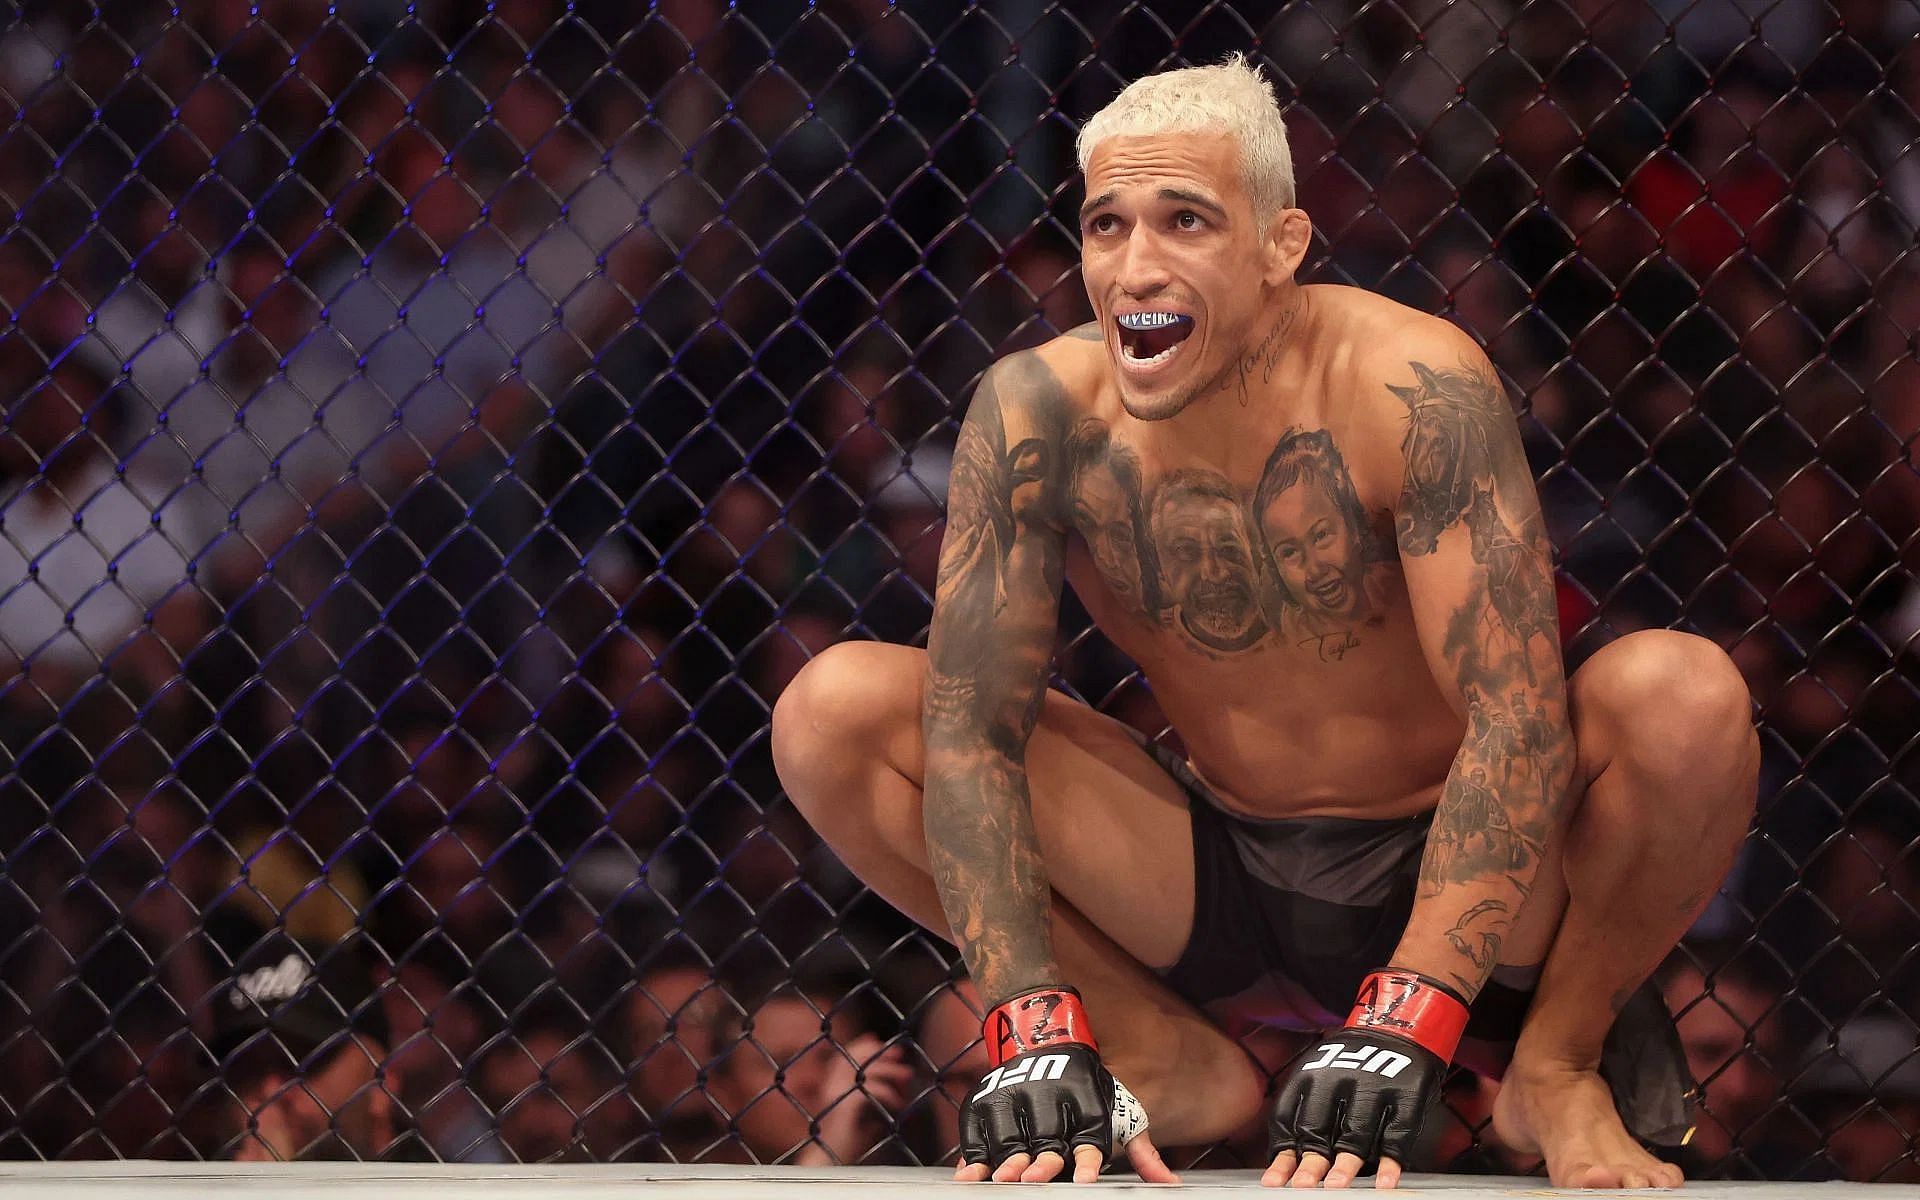 UFC lightweight contender Charles Oliveira shares a one-word response to fan uploaded video of his KO loss to Cub Swanson [Image Courtesy: @GettyImages]